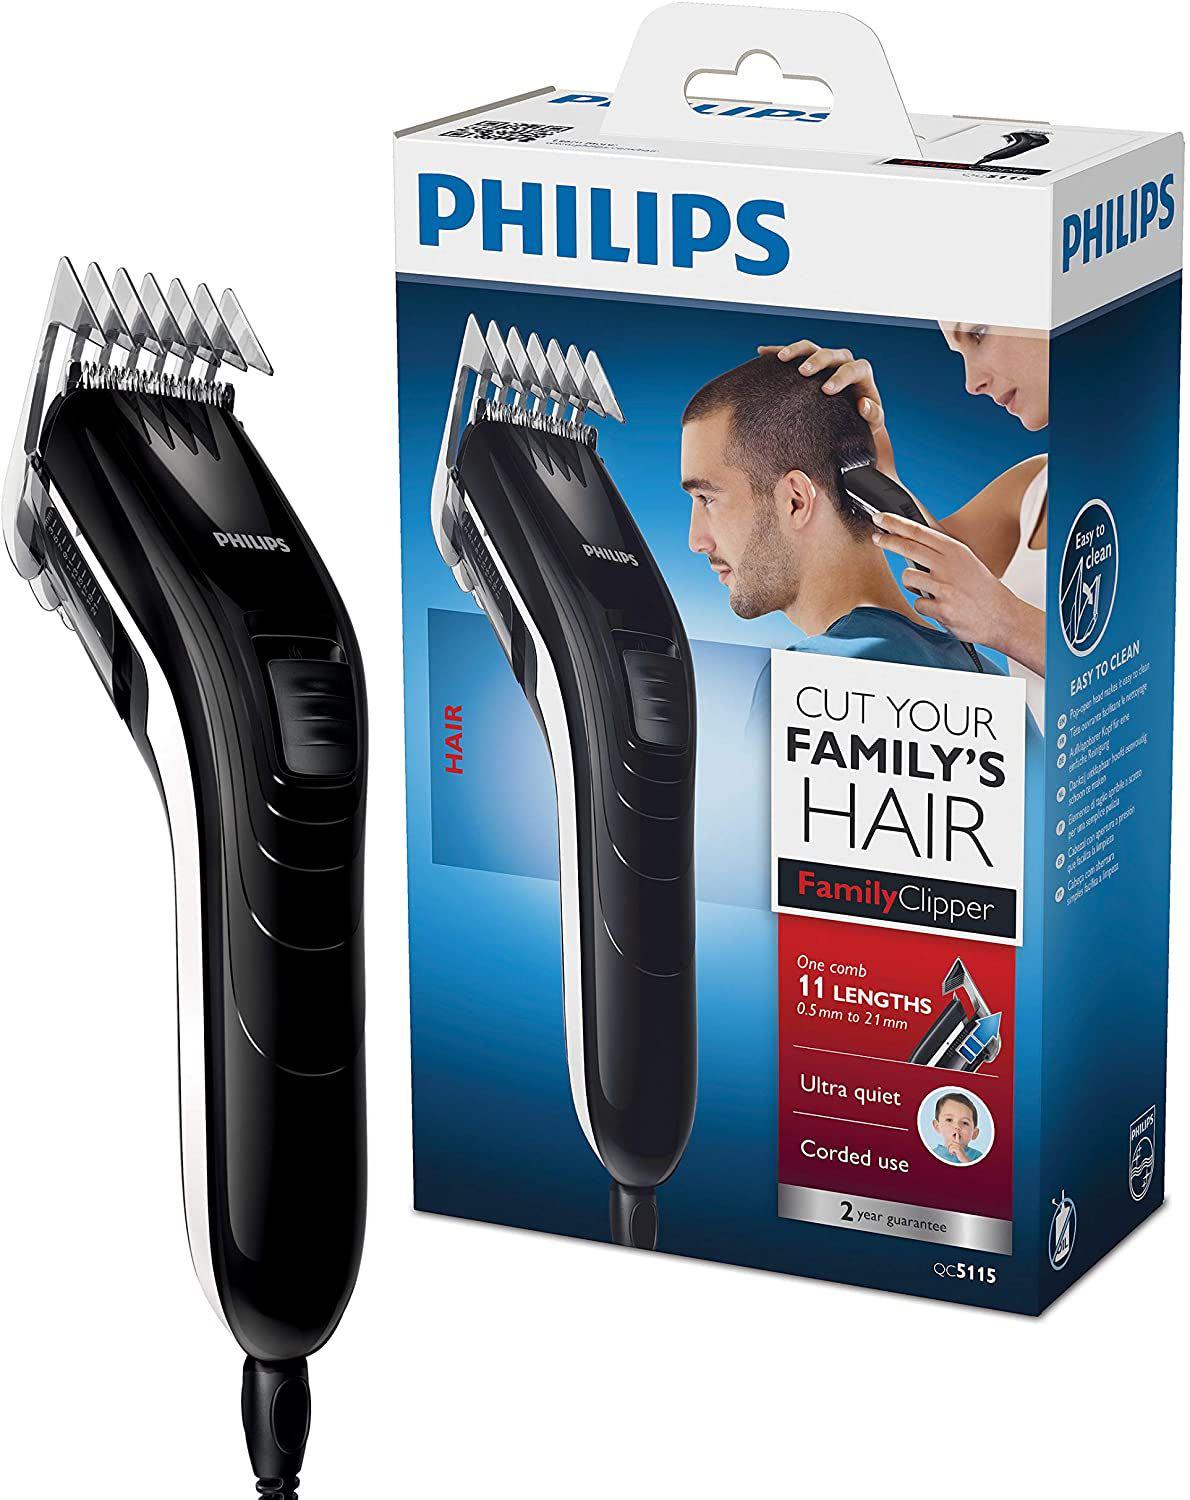 philips cut your family's hair